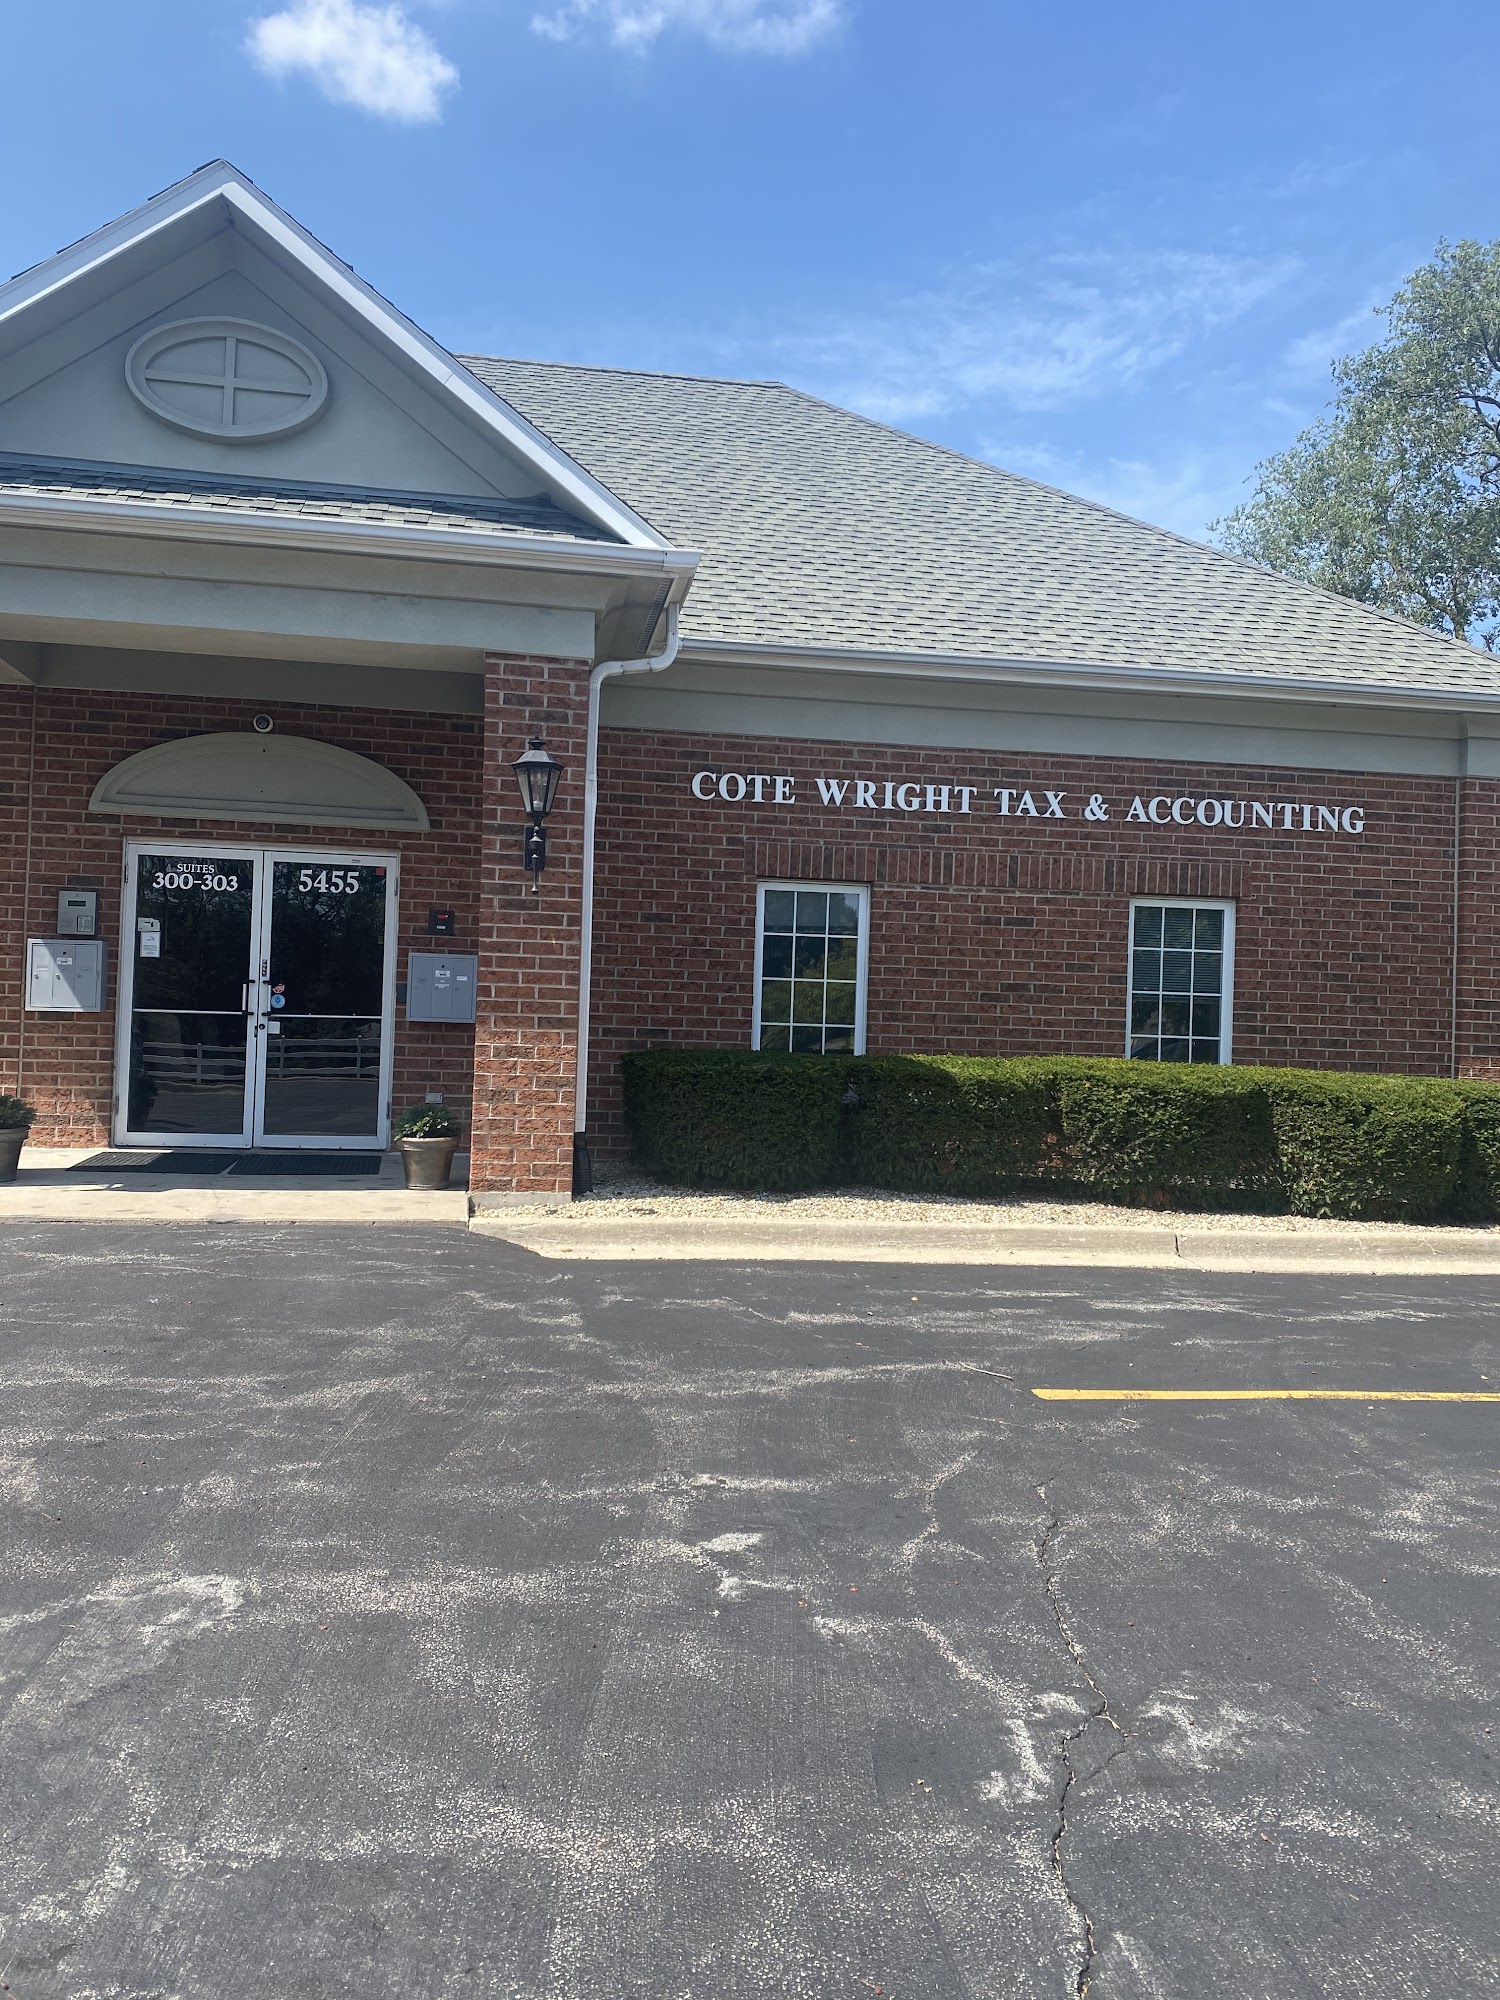 Cote Wright Tax & Accounting, Inc.